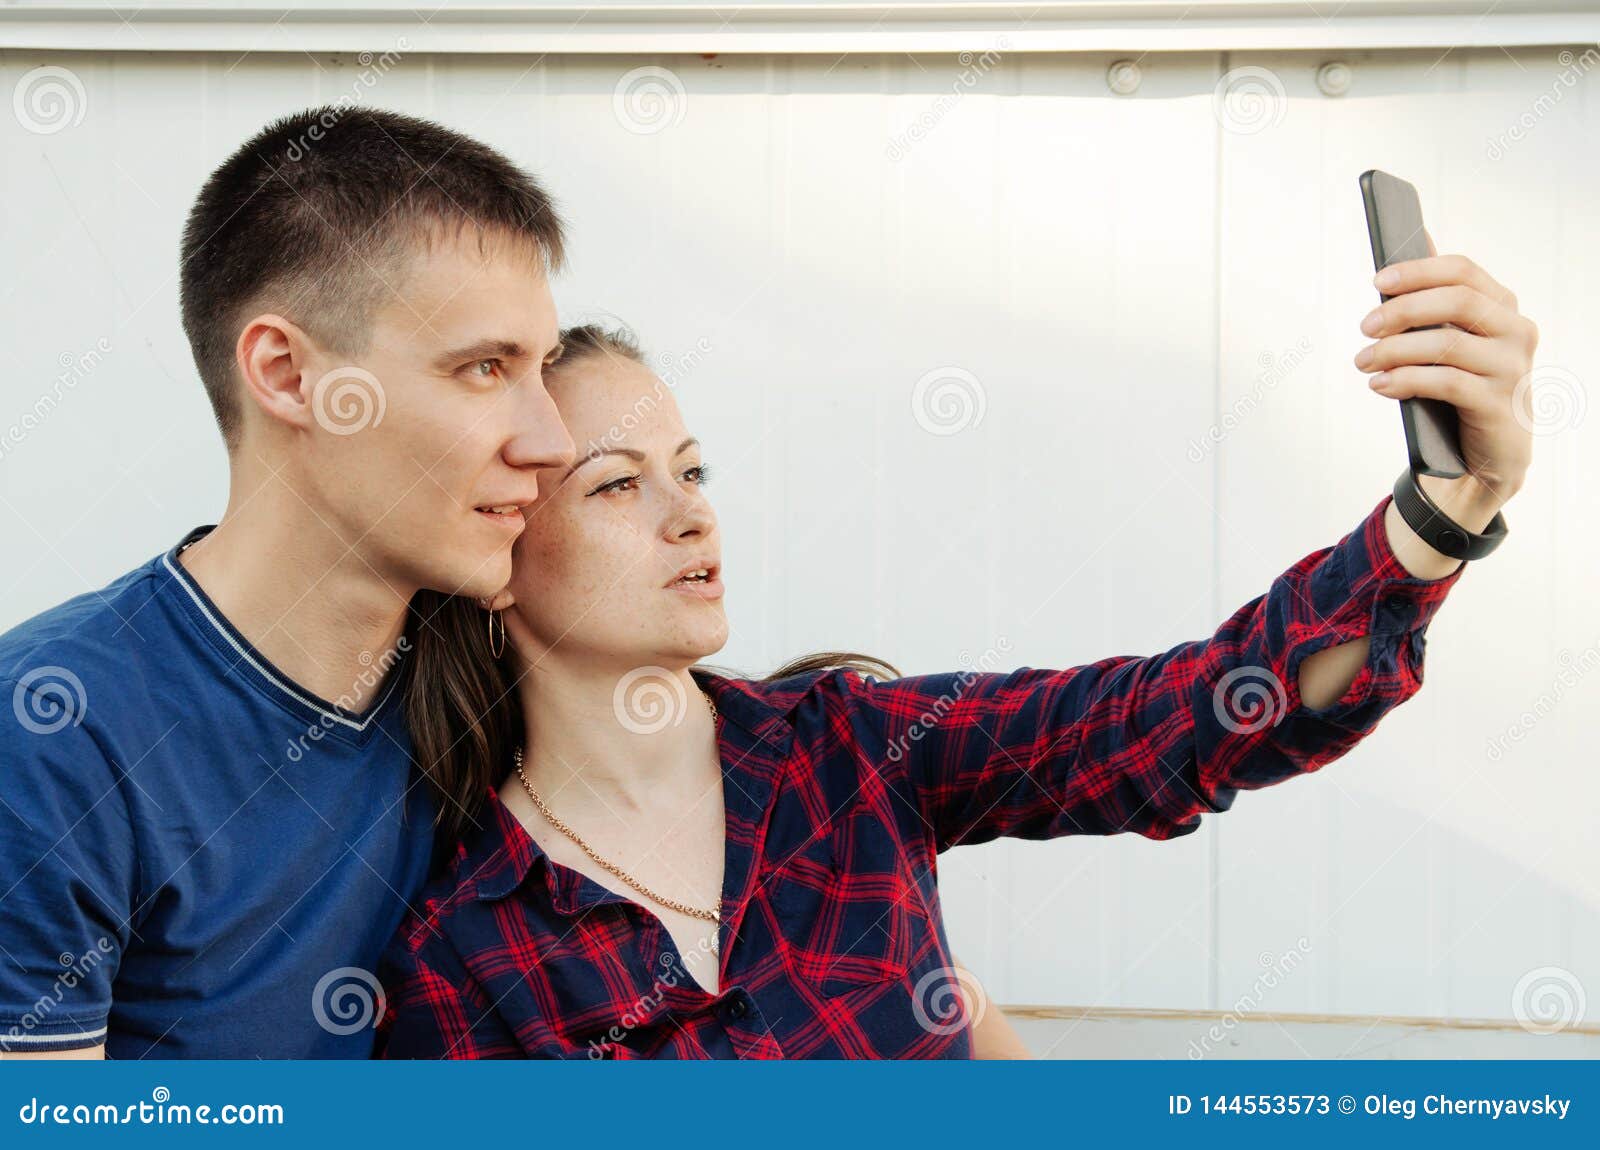 Guy With Short Haircut In Blue T Shirt And Girl With Dark